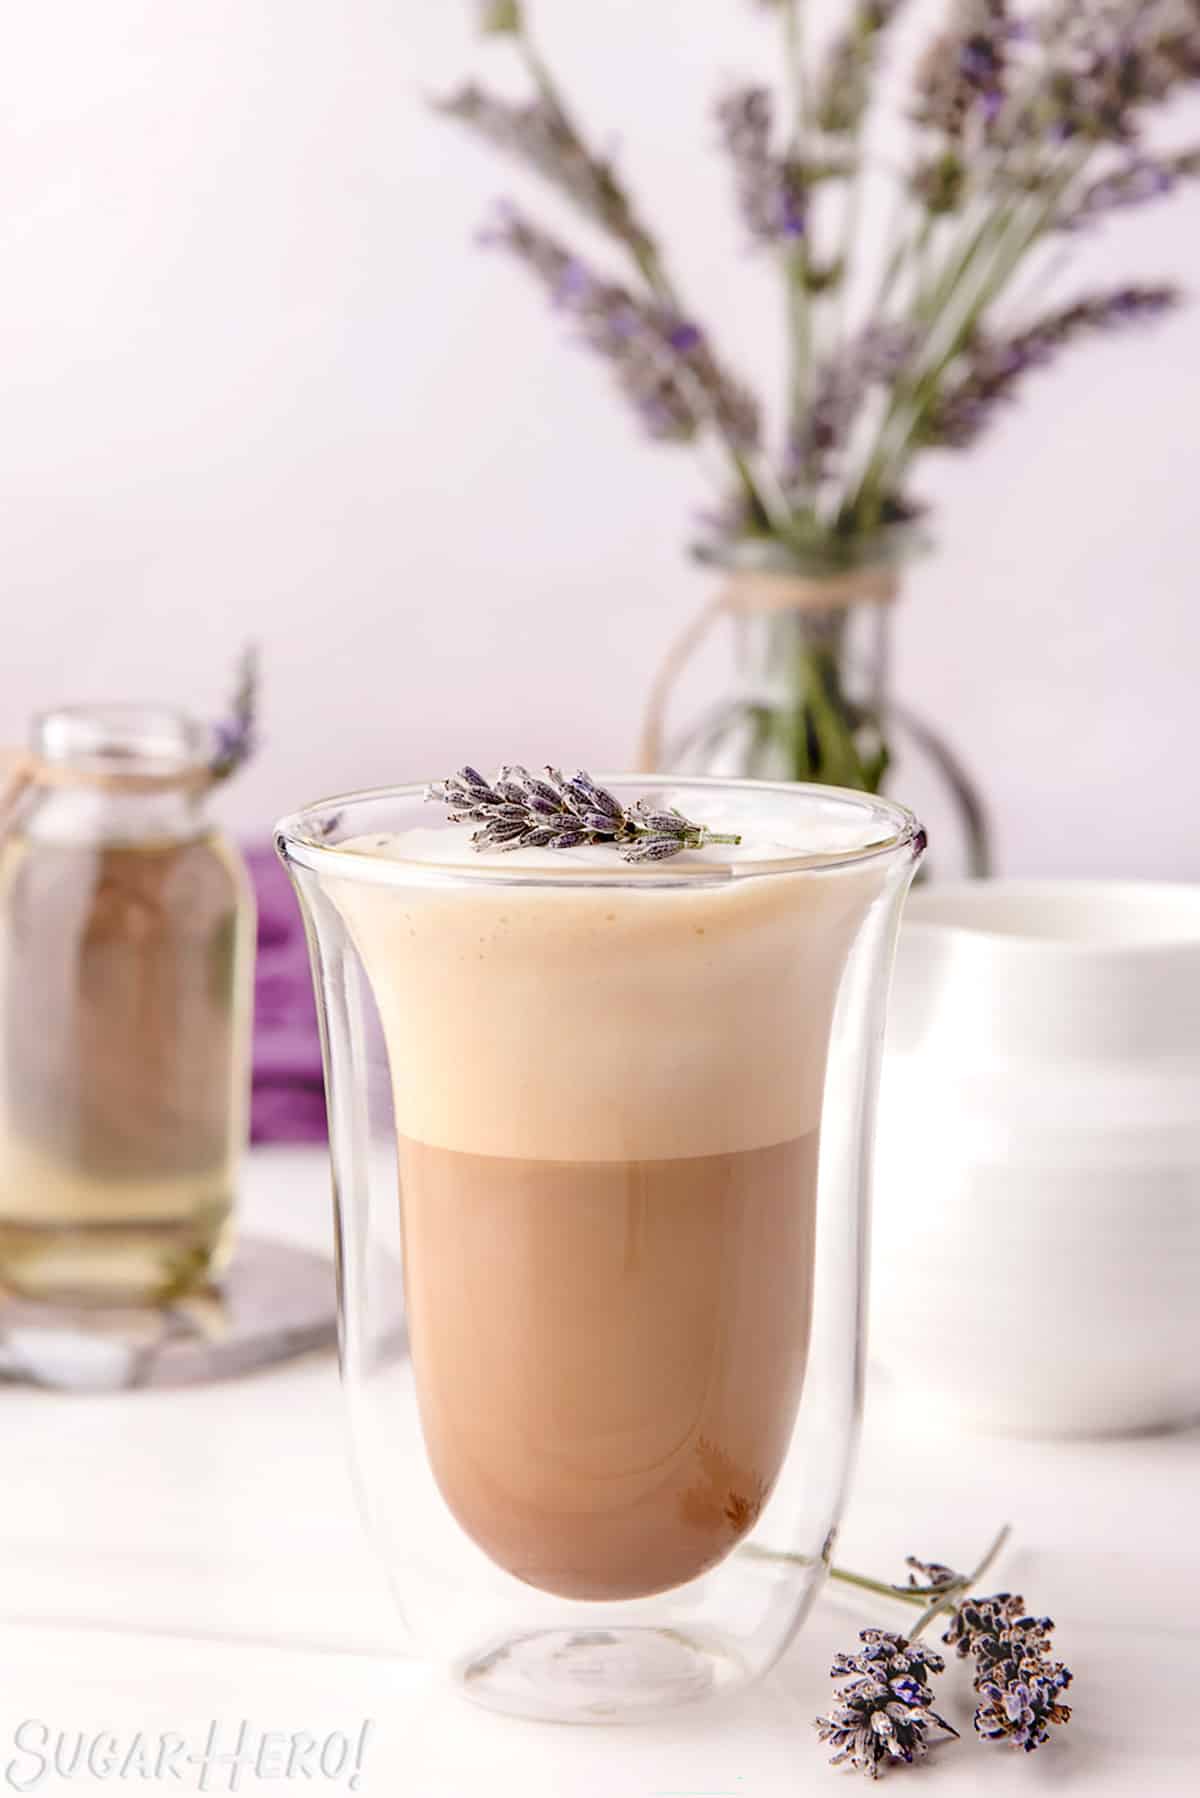 Lavender Latte in a clear glass jar, with simple syrup and a vase of fresh lavender in the background.